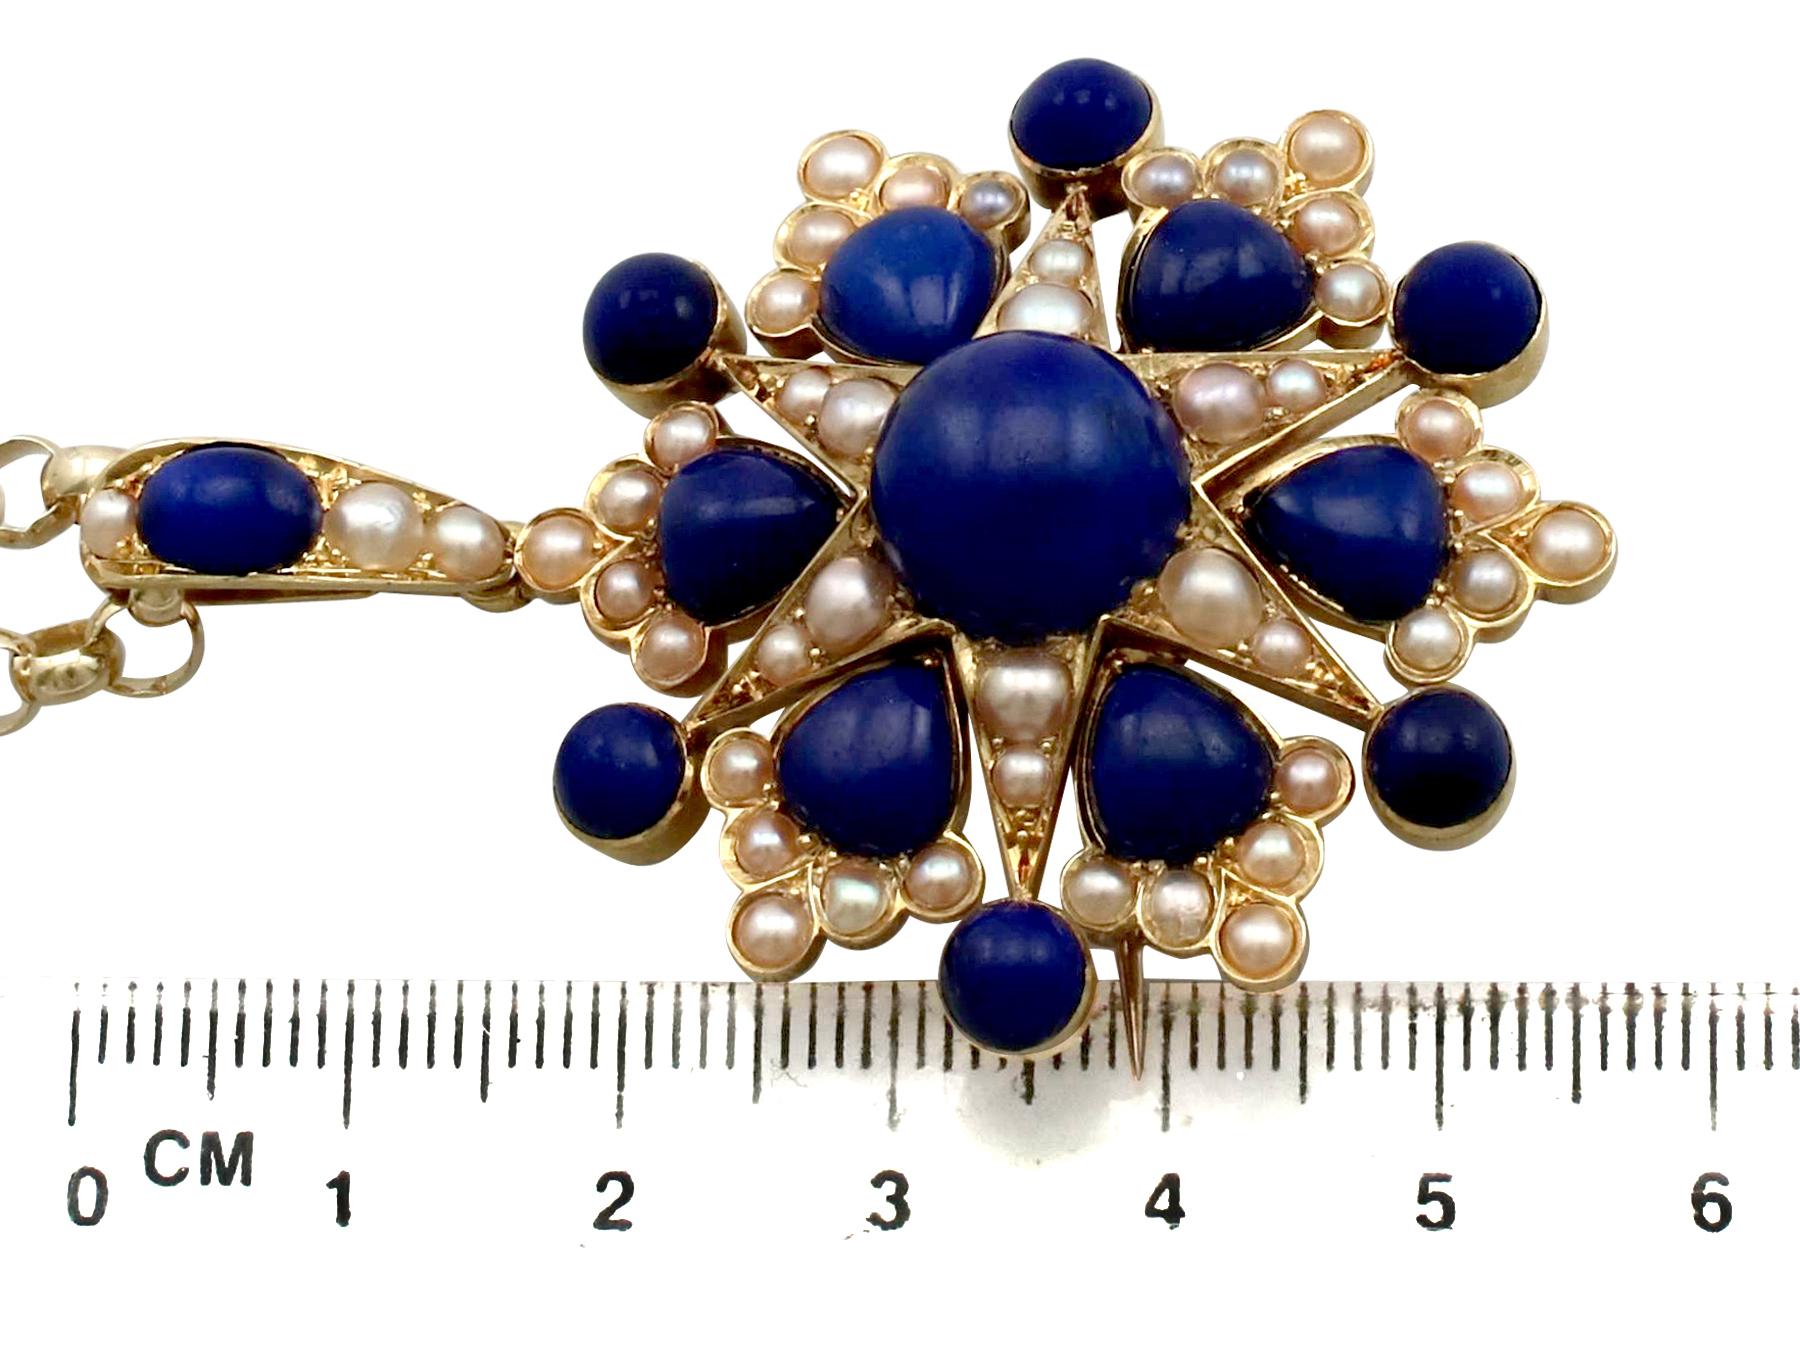 Antique Victorian 13.02 Carat Lapis Lazuli and Pearl Yellow Gold Pendant Brooch 5